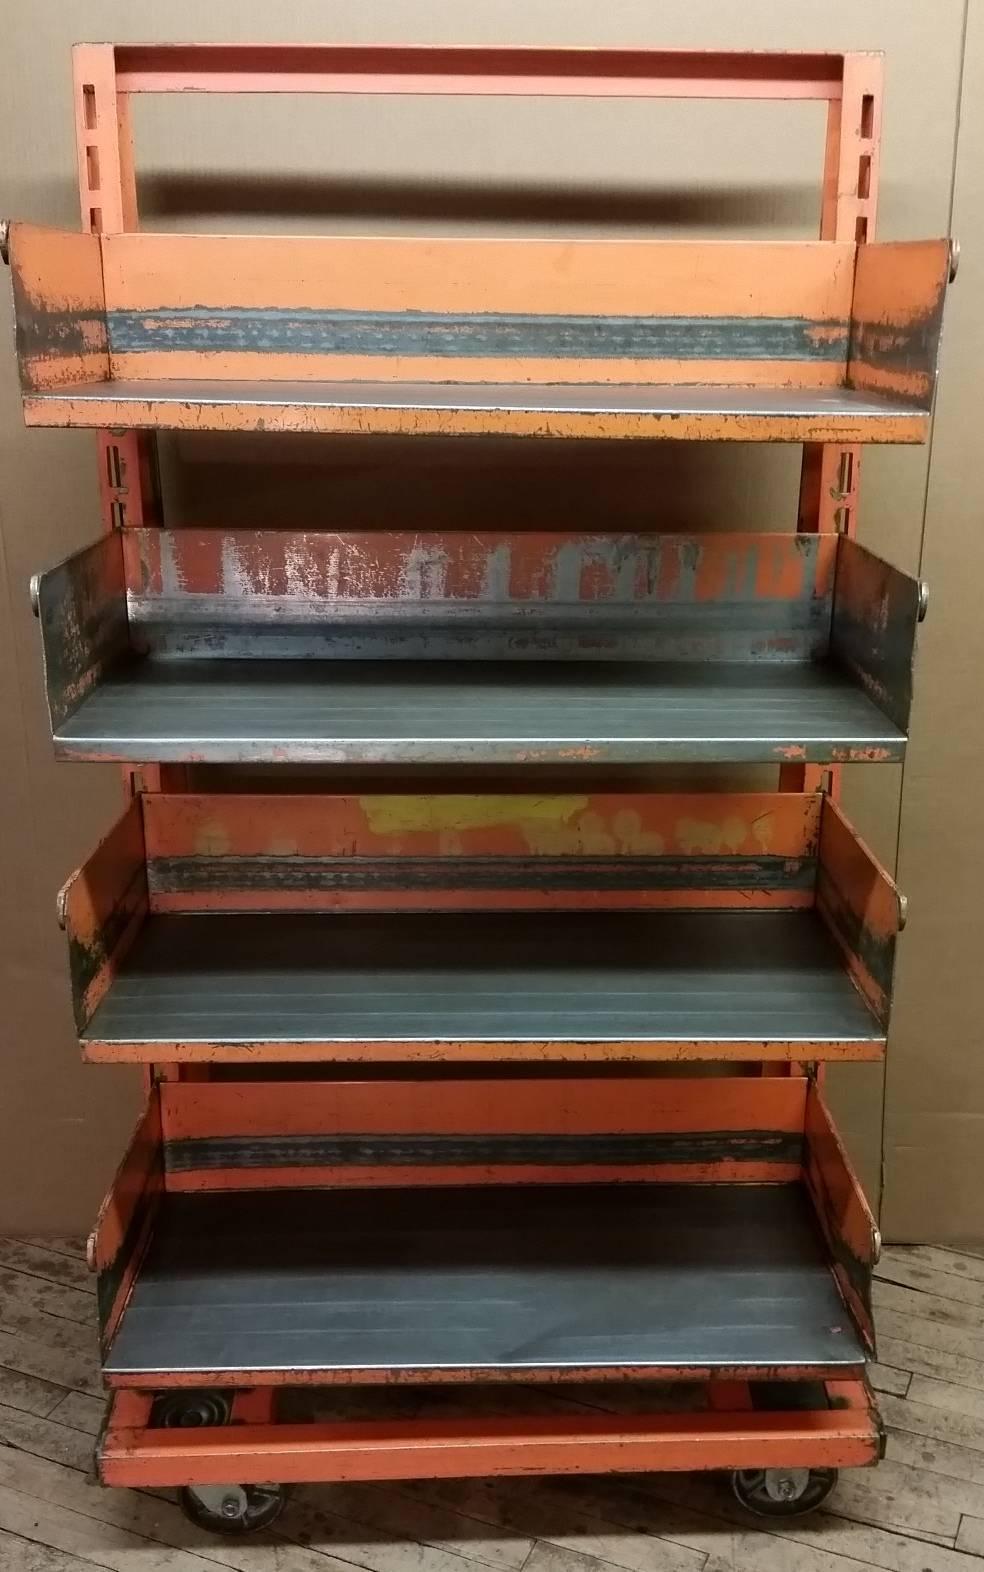 Straight from the factory floor in original colors. Cleaned, sealed and room ready, this early A-frame shelving unit adds style and storage to any room. Can also be used as a bookcase. Easily adjustable bin shelves with handles. Casters allow it to